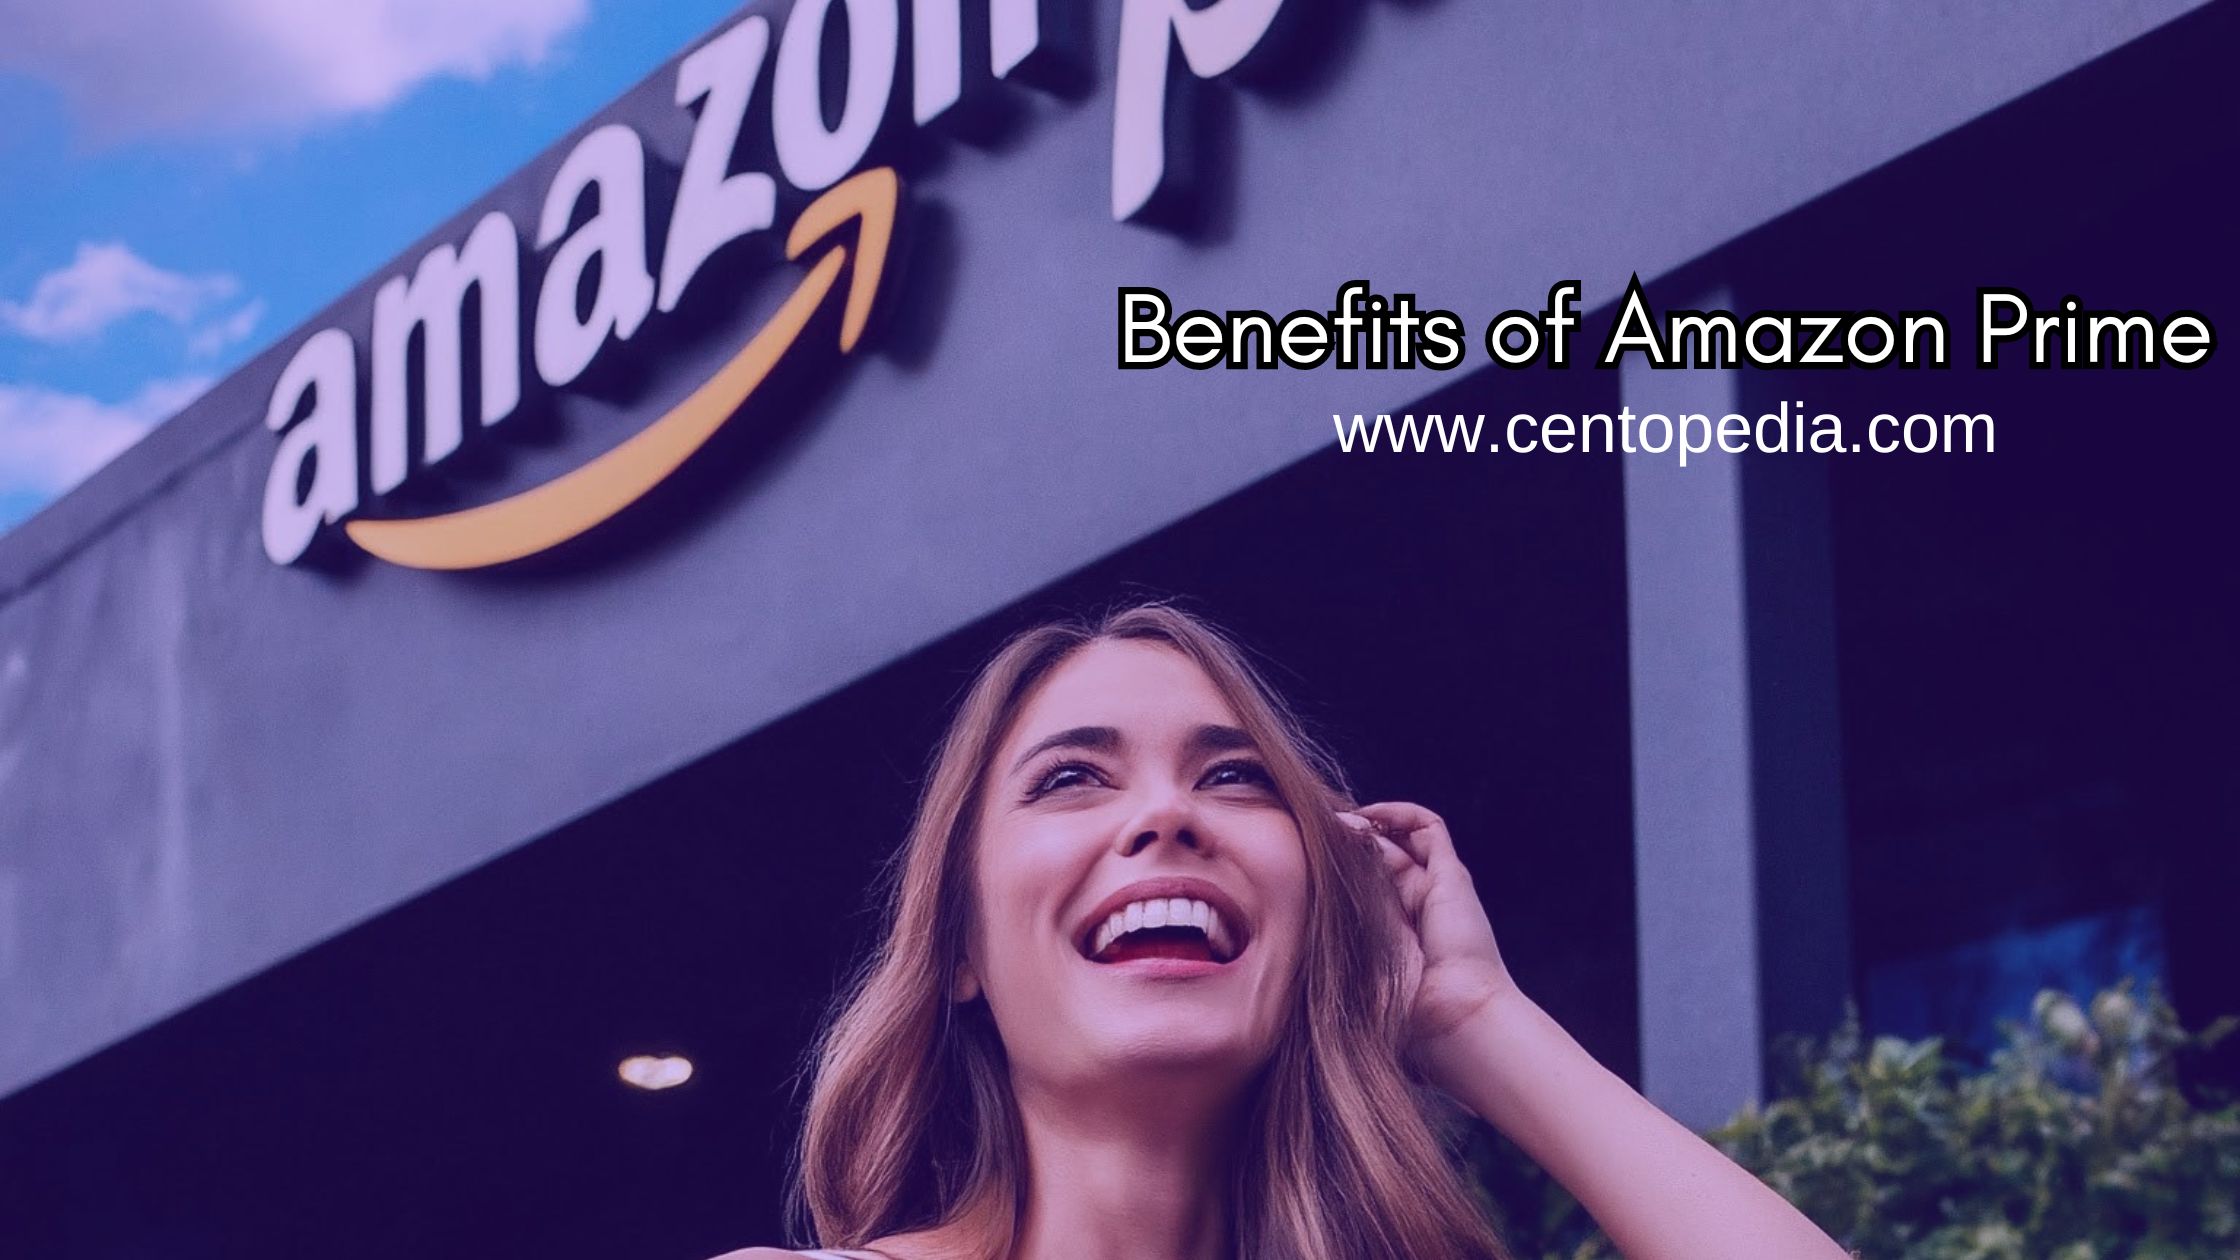 what exactly do you get with amazon prime, benefits of amazon prime